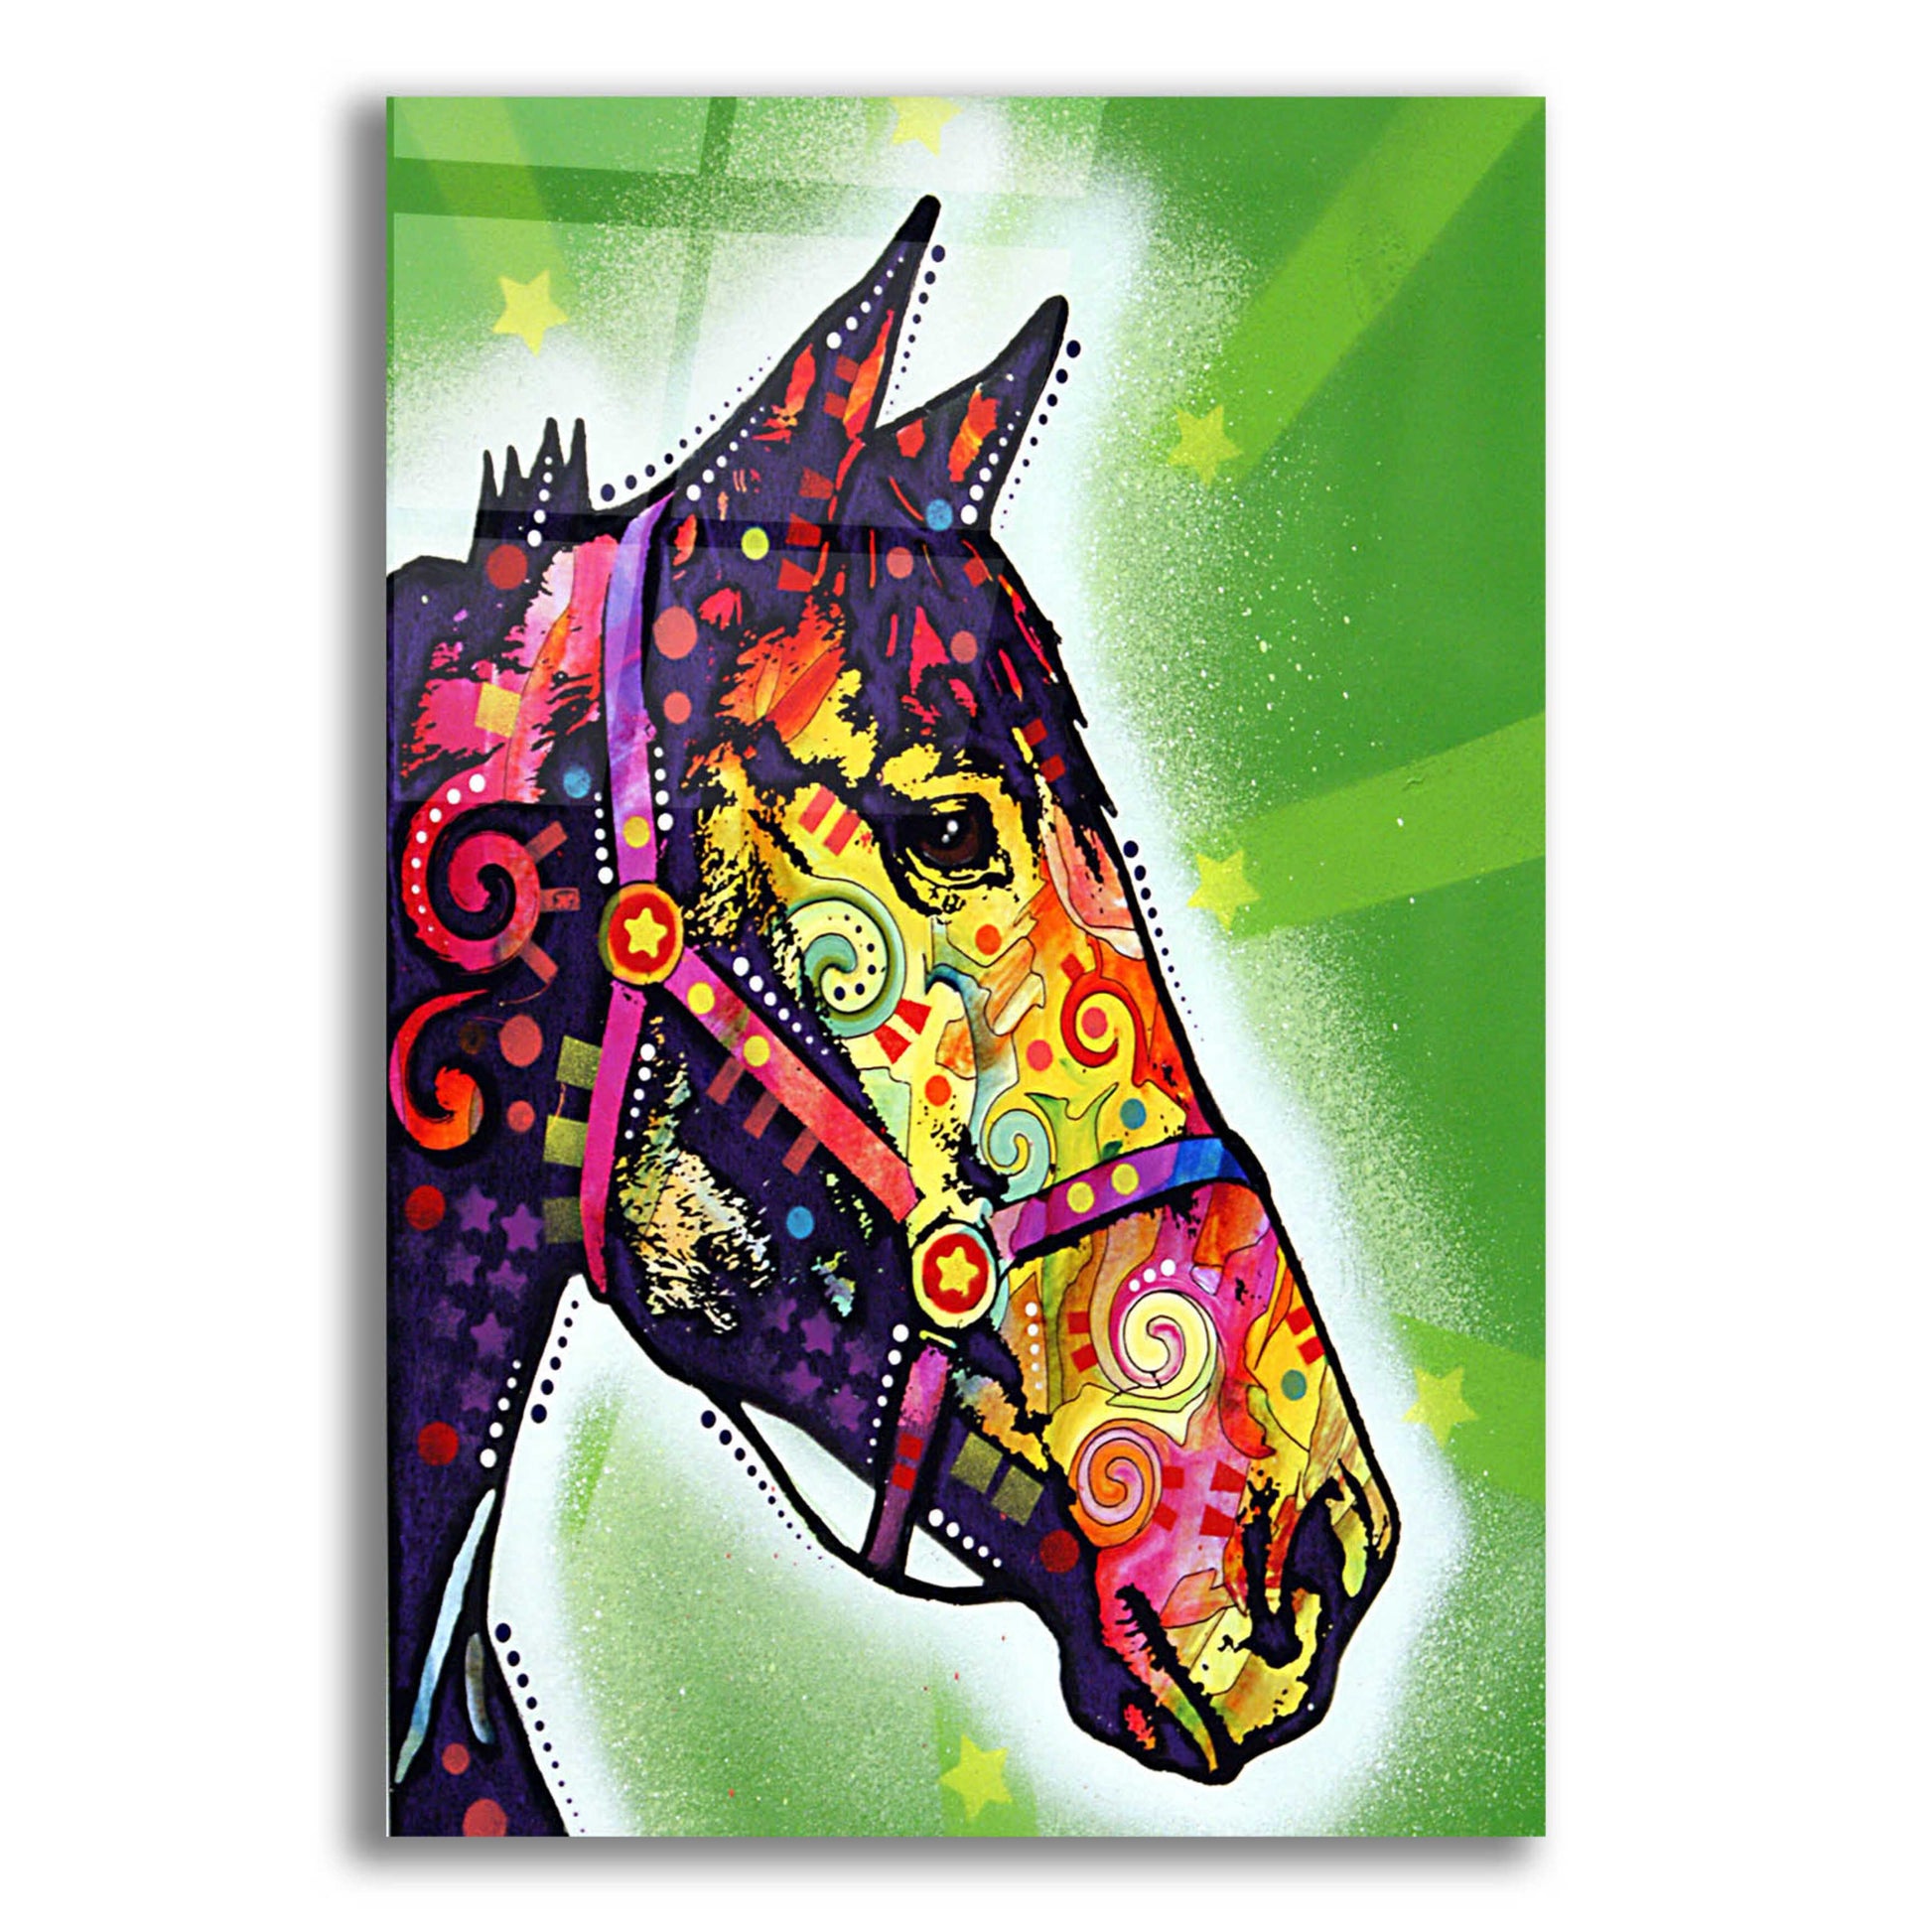 Epic Art 'Horse 2' by Dean Russo, Acrylic Glass Wall Art